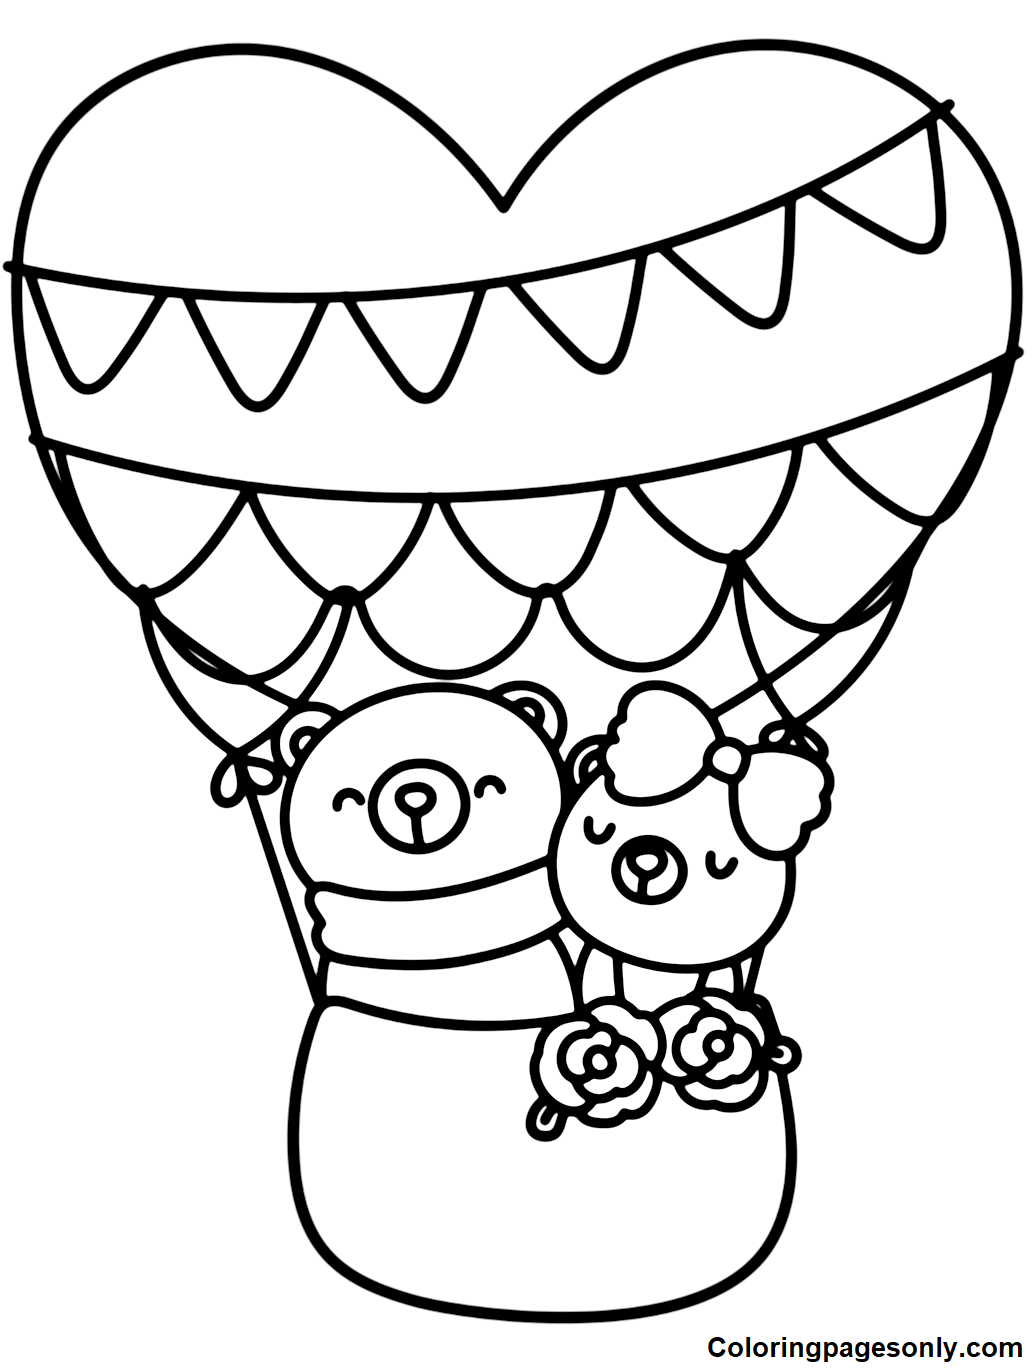 Two Bear in Heart Hot Air Balloon Coloring Pages